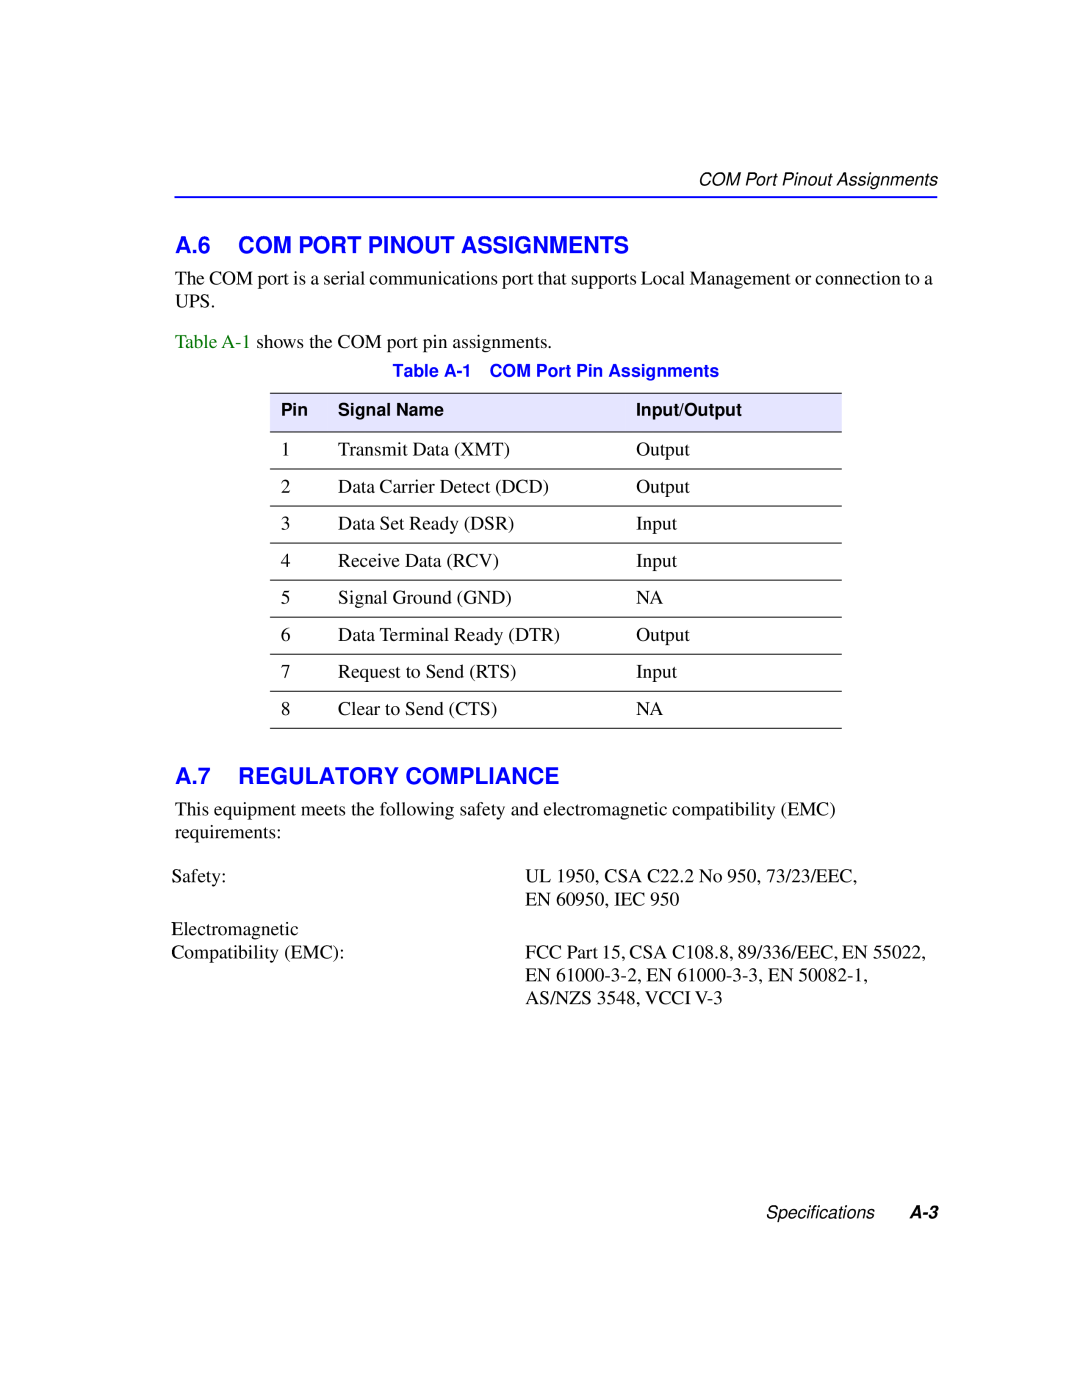 Cabletron Systems 2H253-25R manual A.6 COM PORT PINOUT ASSIGNMENTS, A.7 REGULATORY COMPLIANCE 